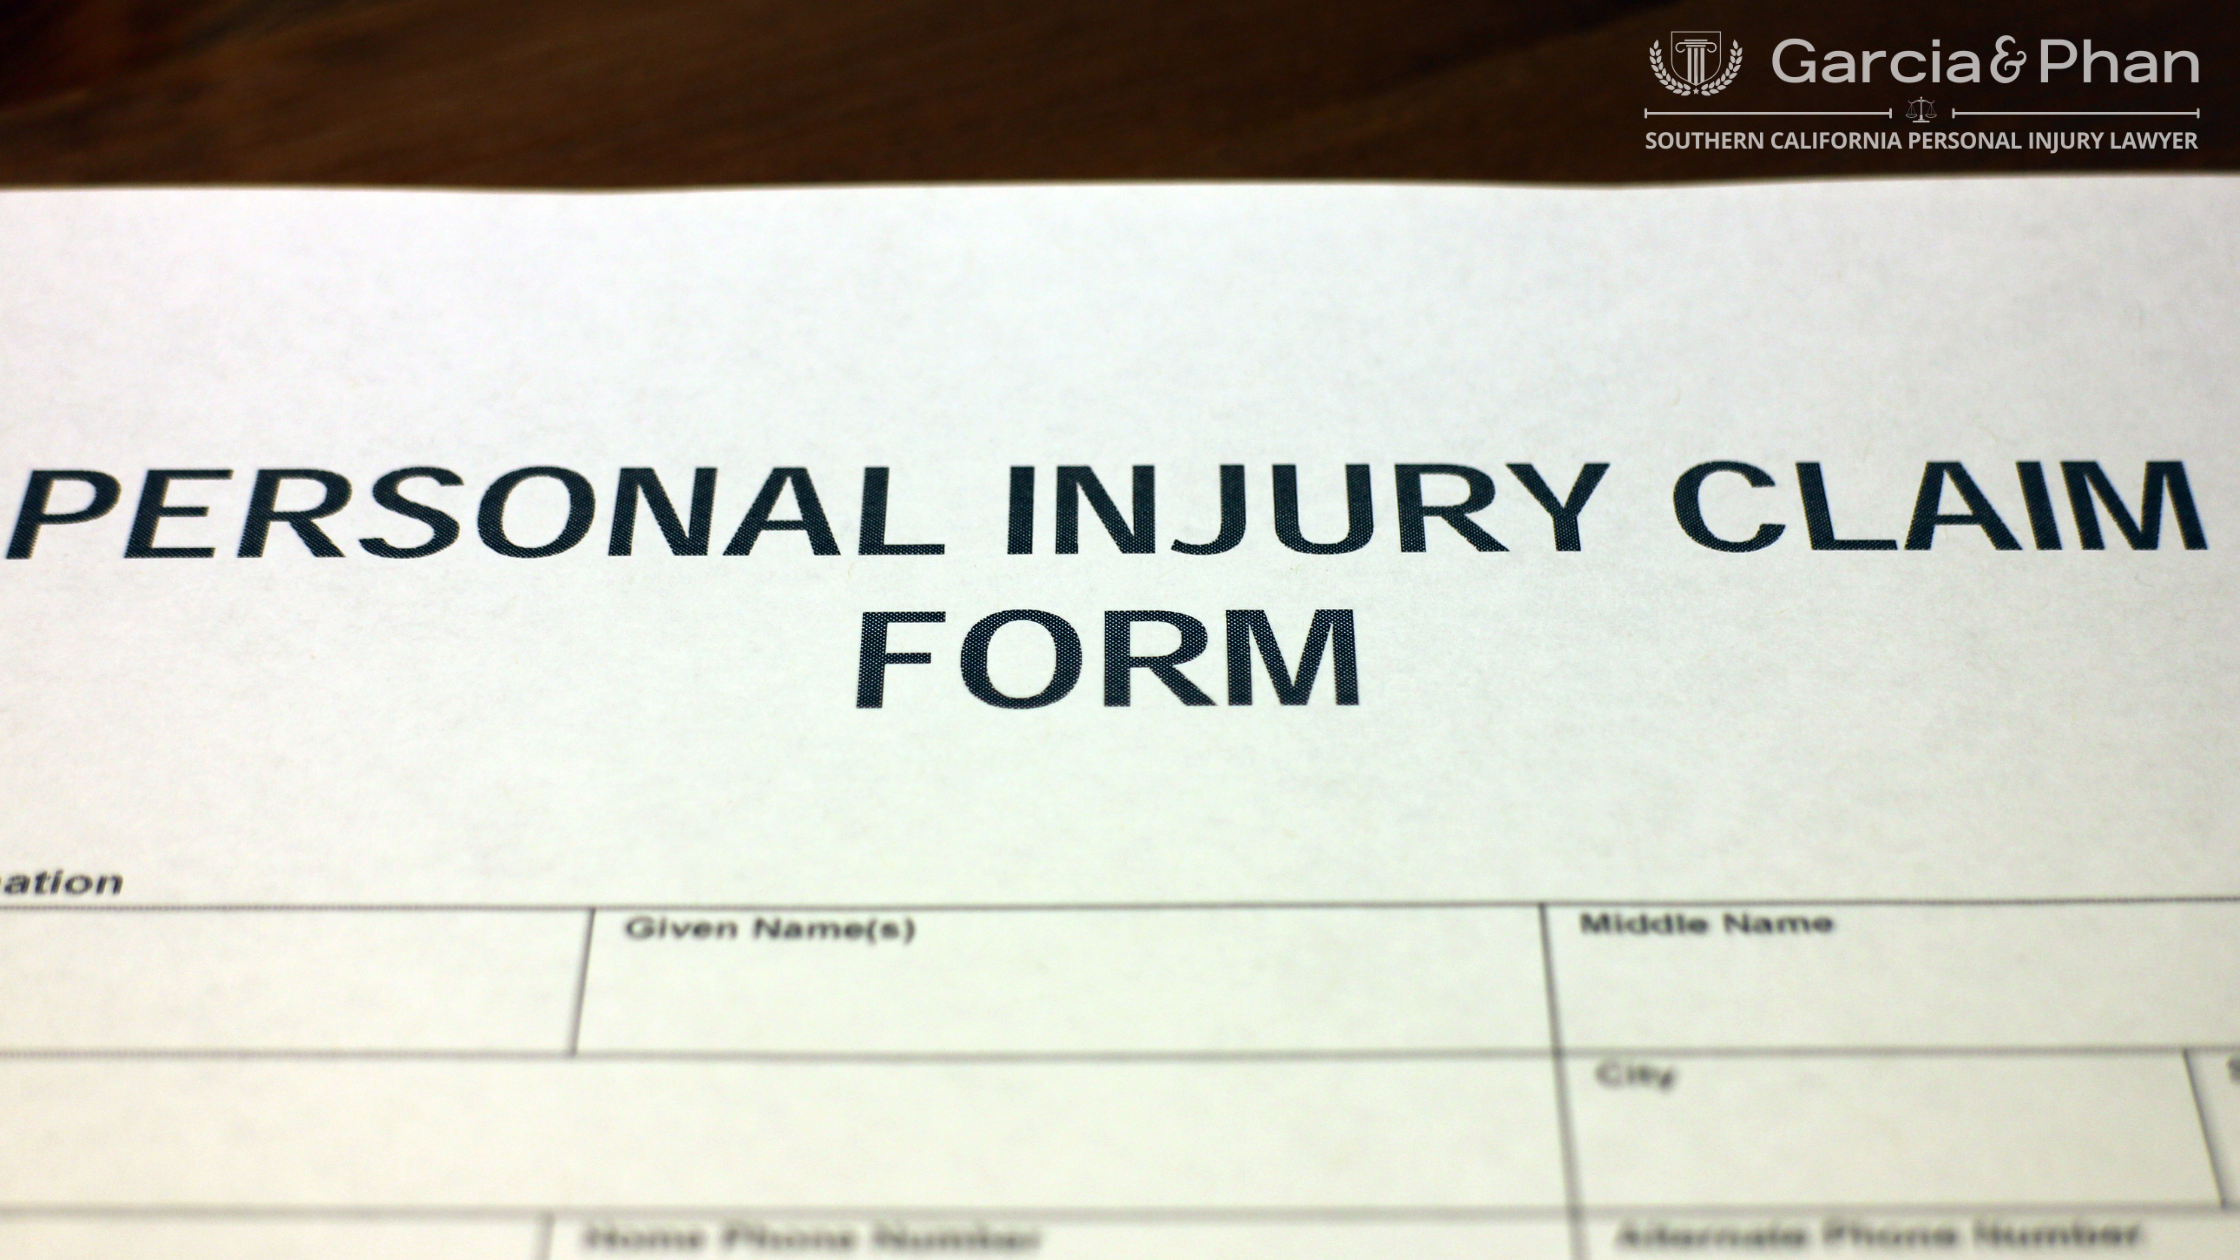 Limitations To Know When Filing A Personal Injury Claim | Garcia Phan